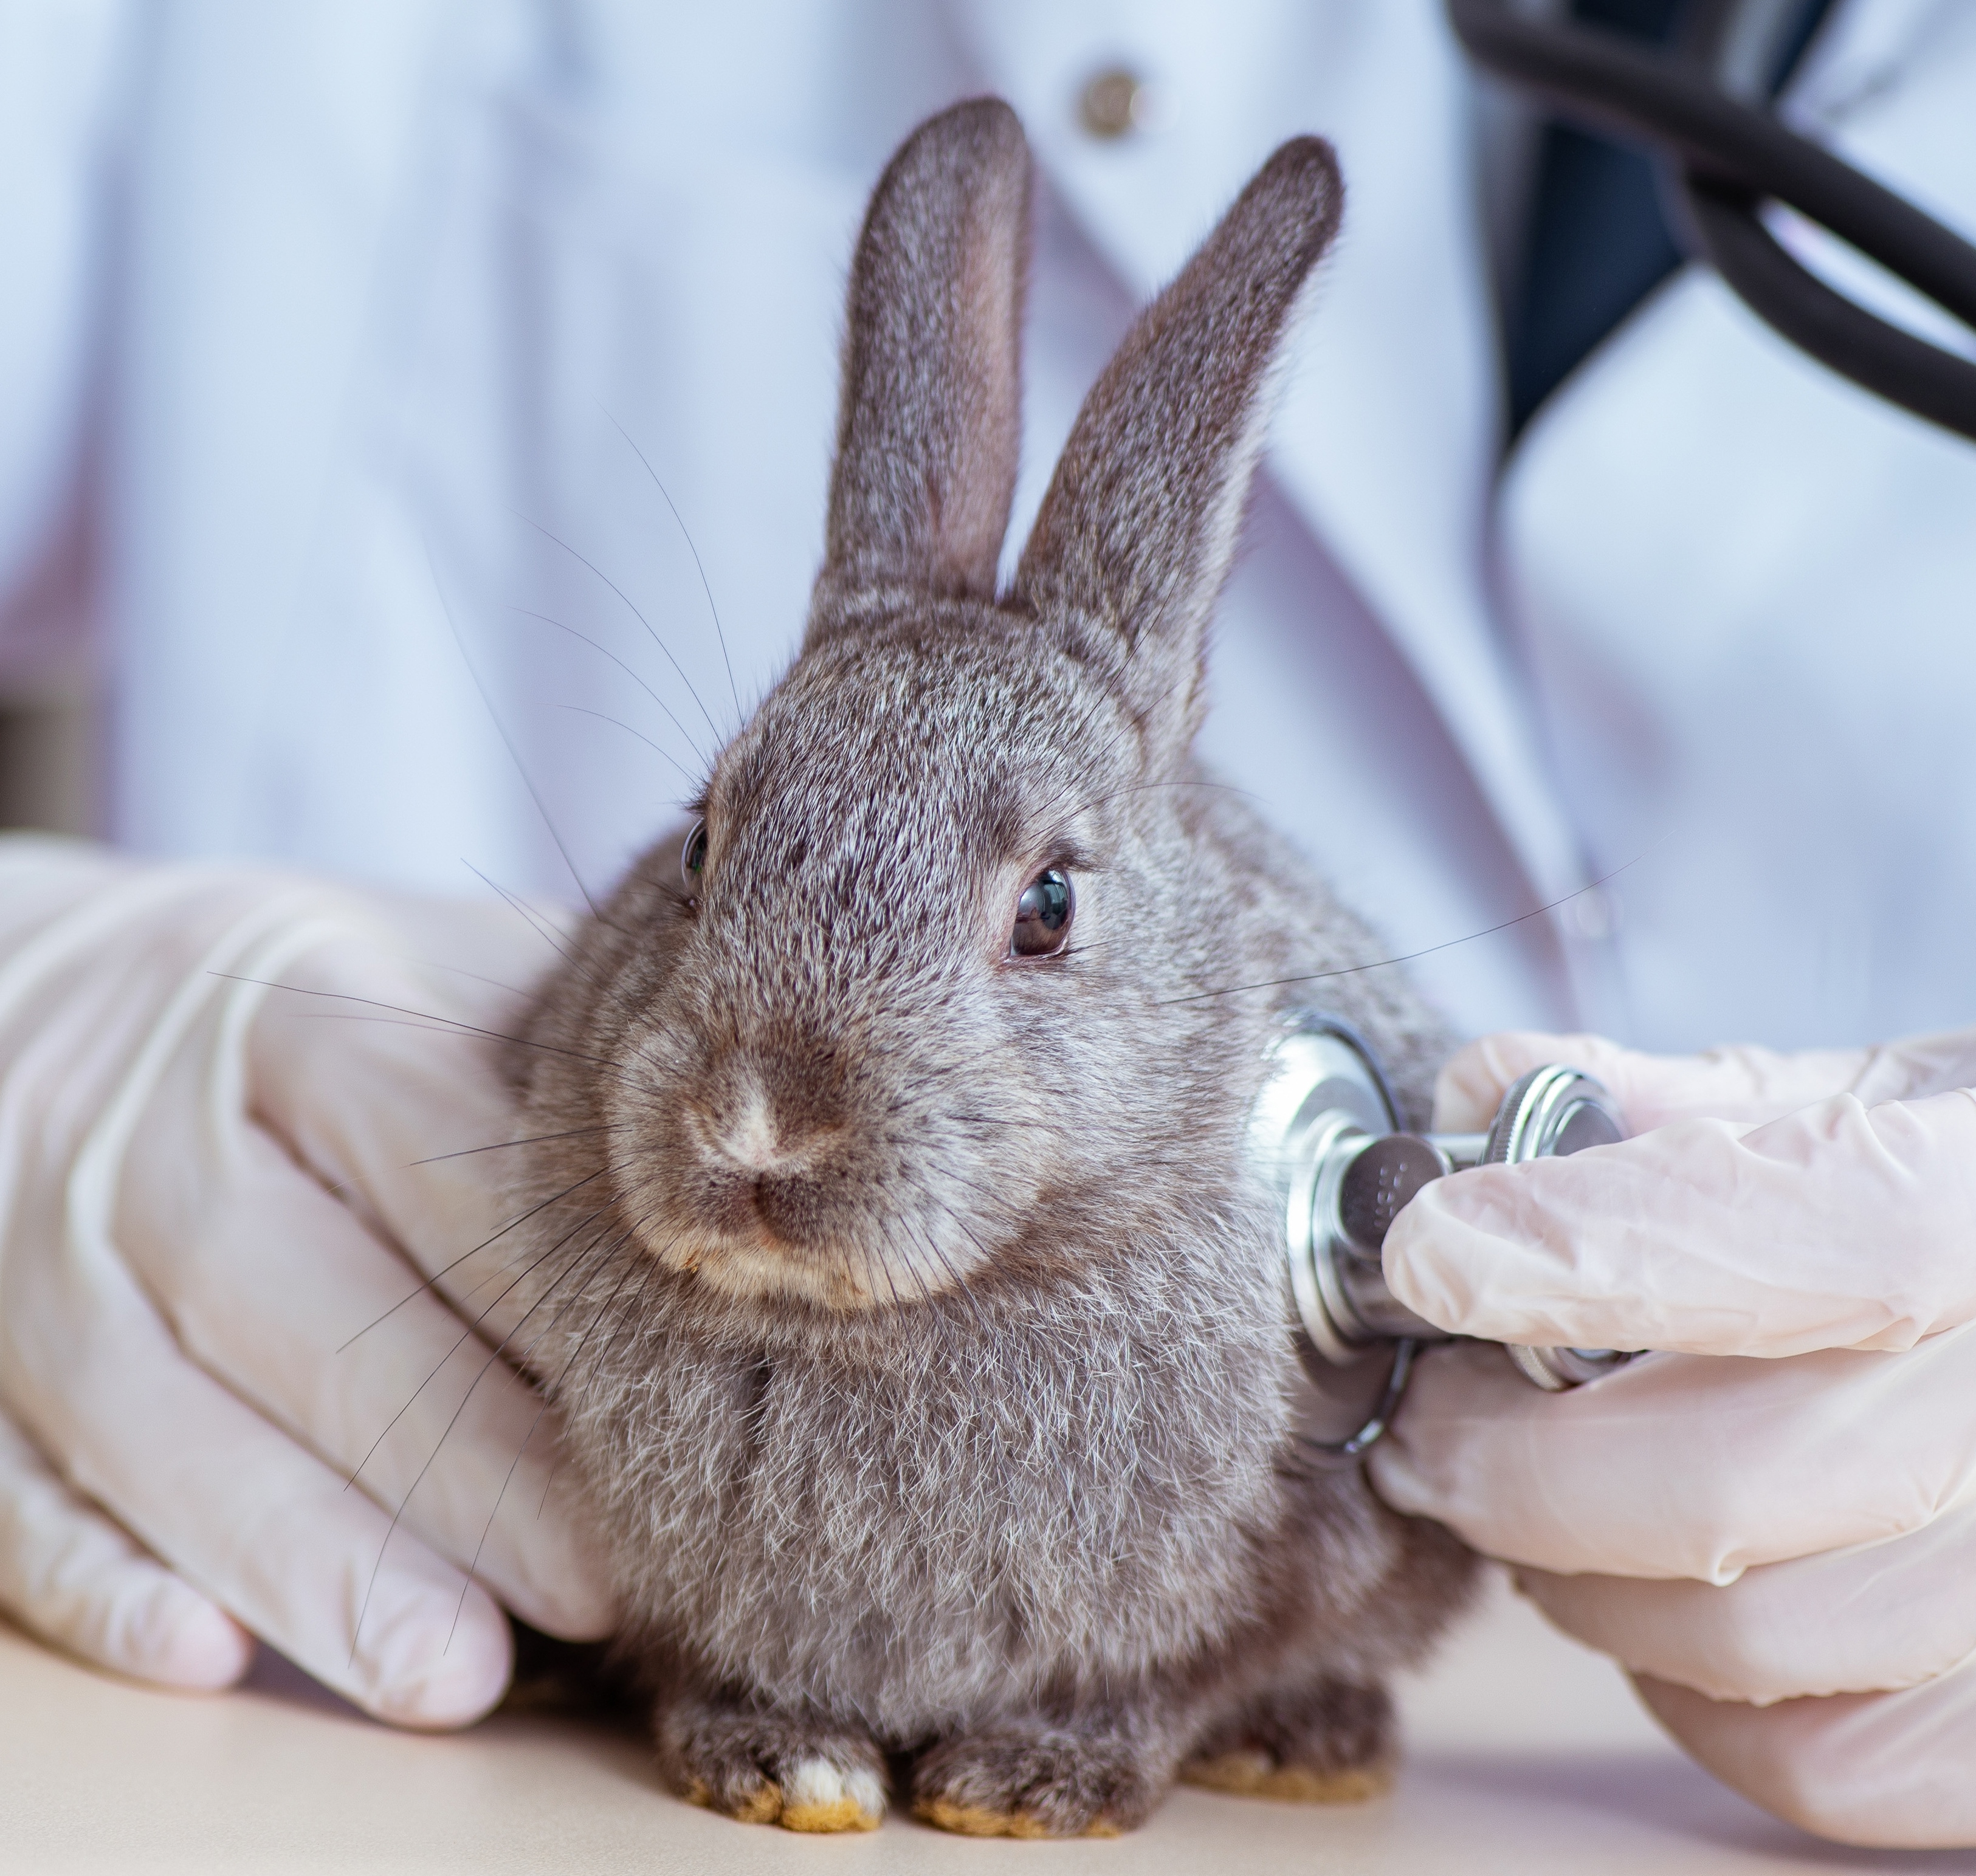 Identifying rabbit pain can be tricky for us owners. Since rabbits are prey animals, they do not like to advertise when they are not feeling well.